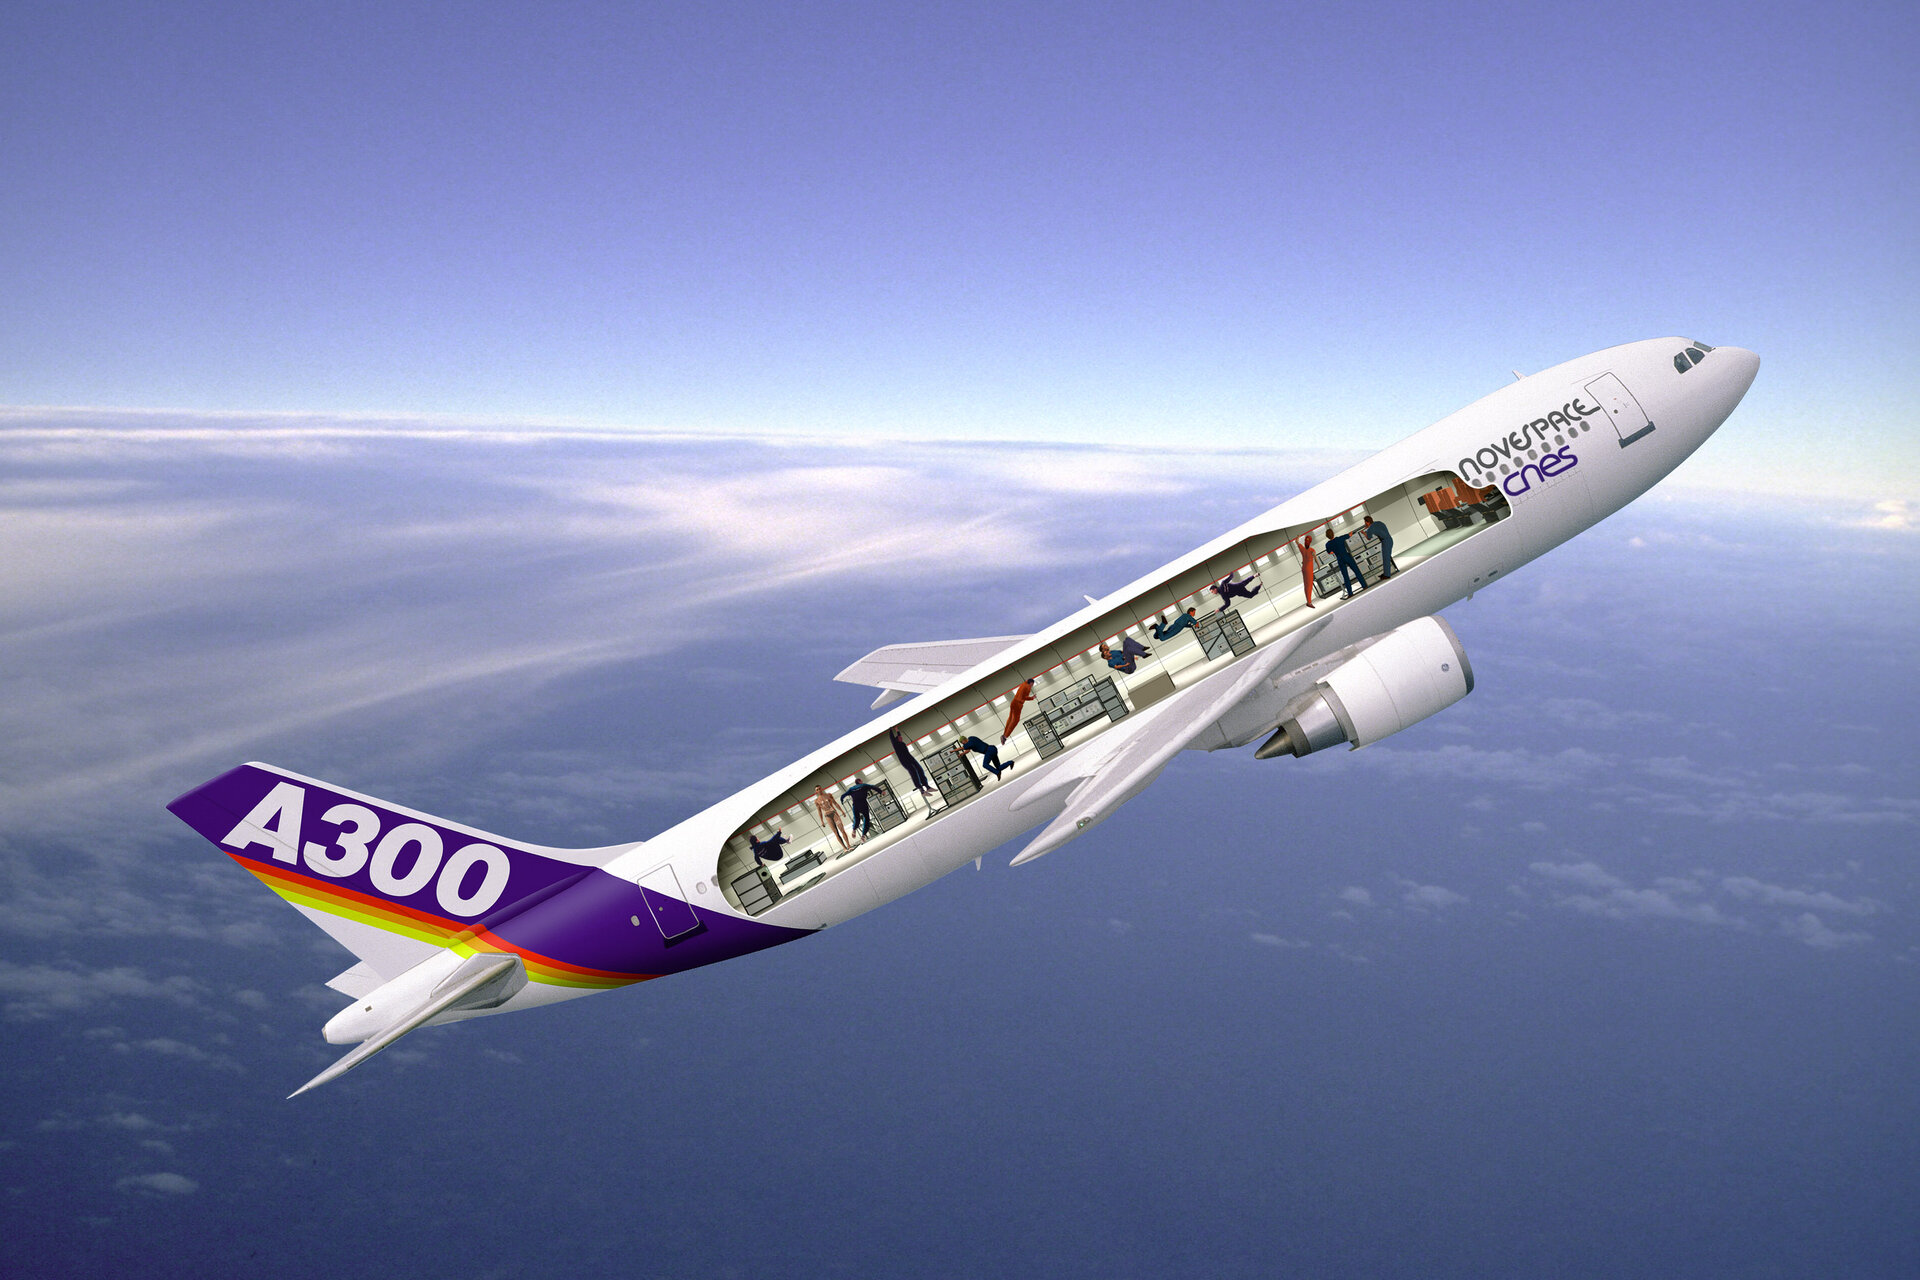 The speciallly strengthened 'Zero-G' Airbus A300